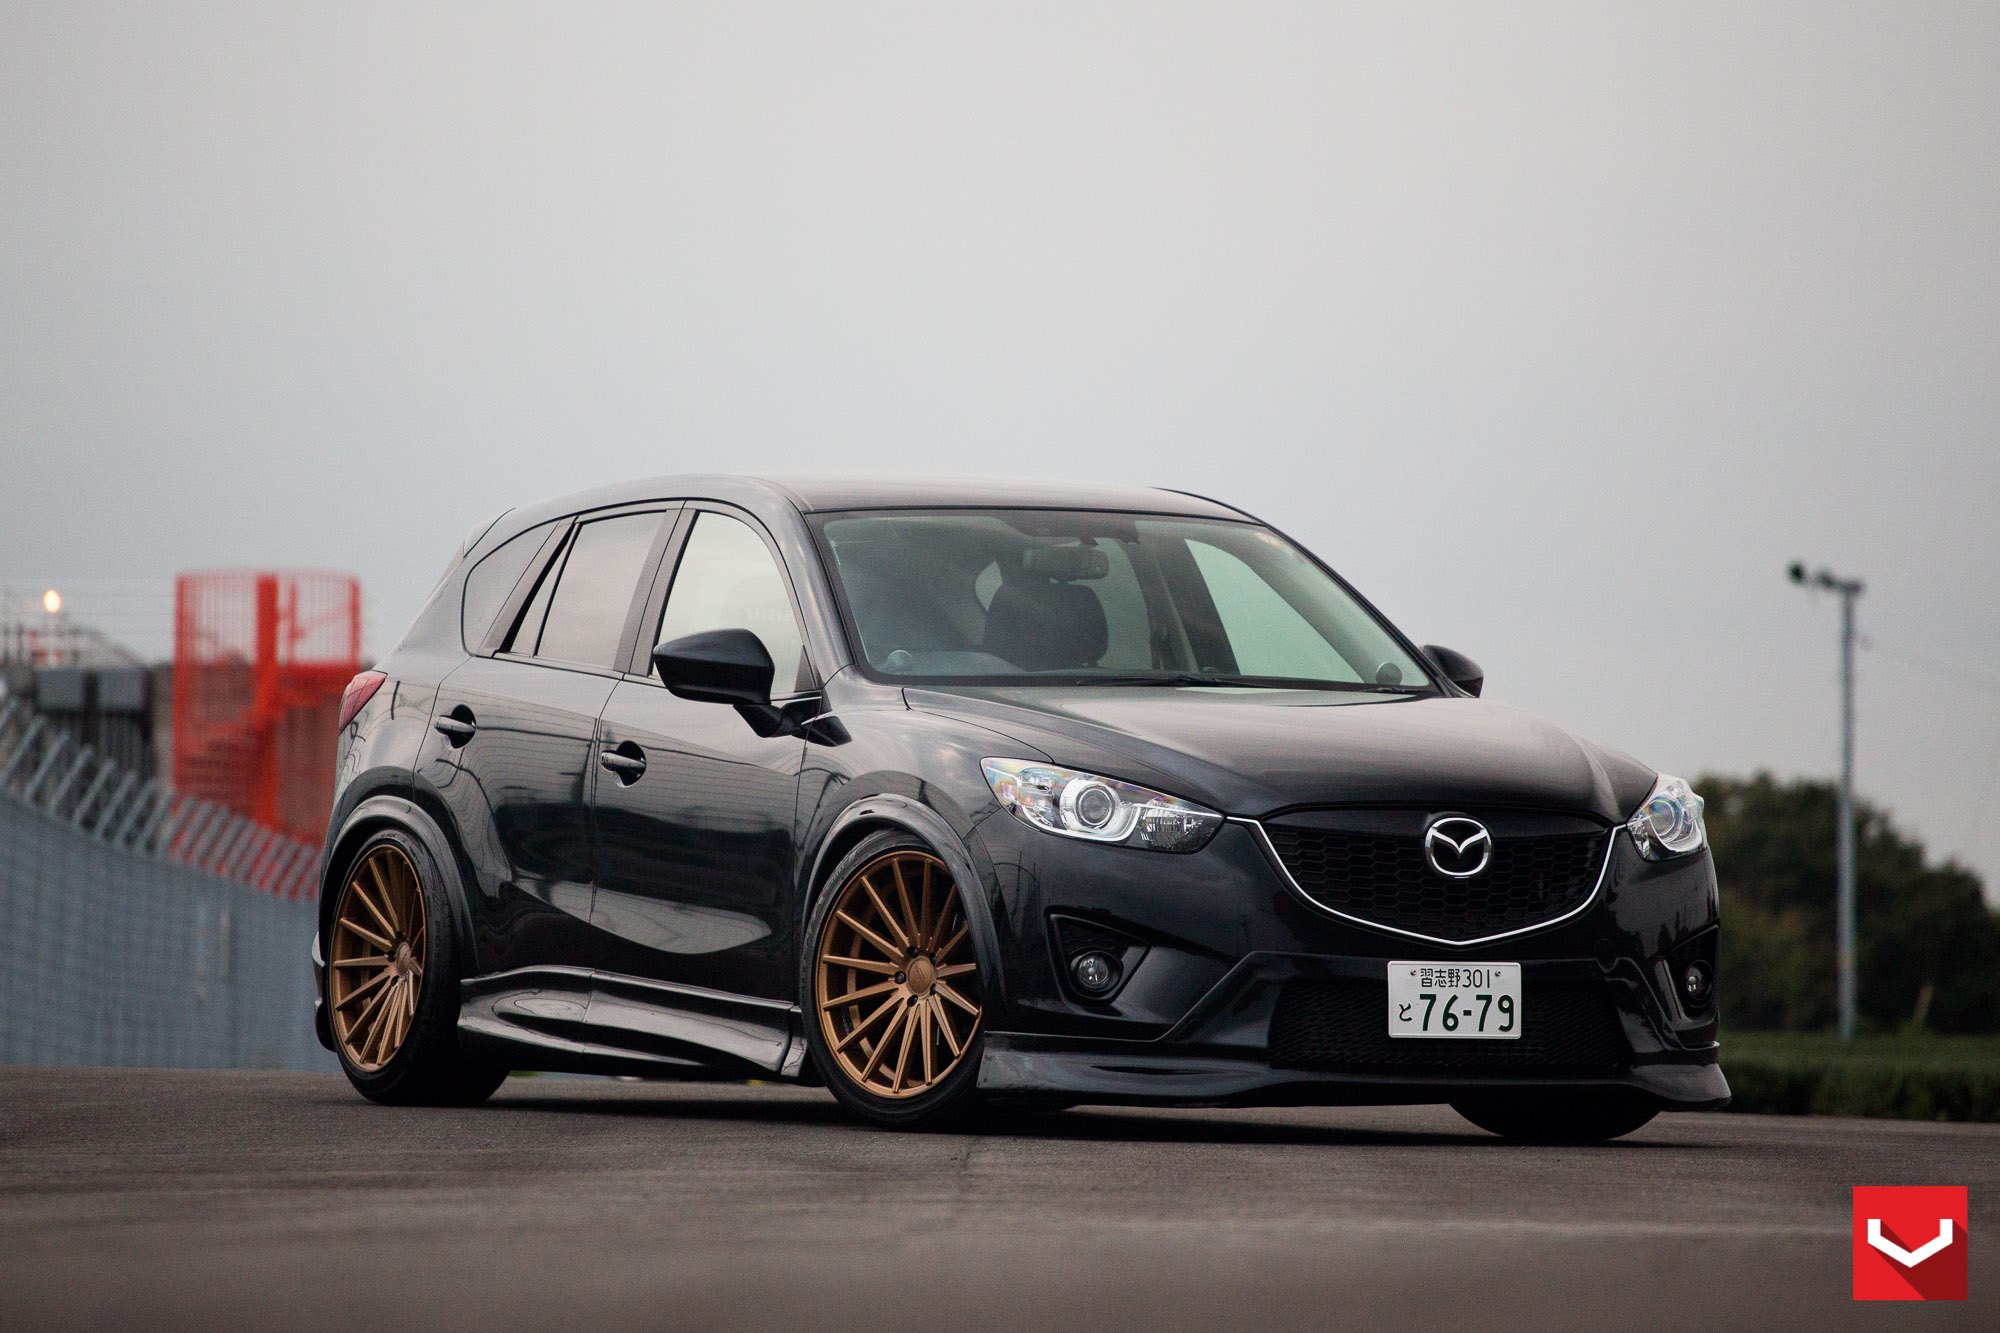 Black Mazda CX-5 with Custom Front Bumper - Photo by Vossen